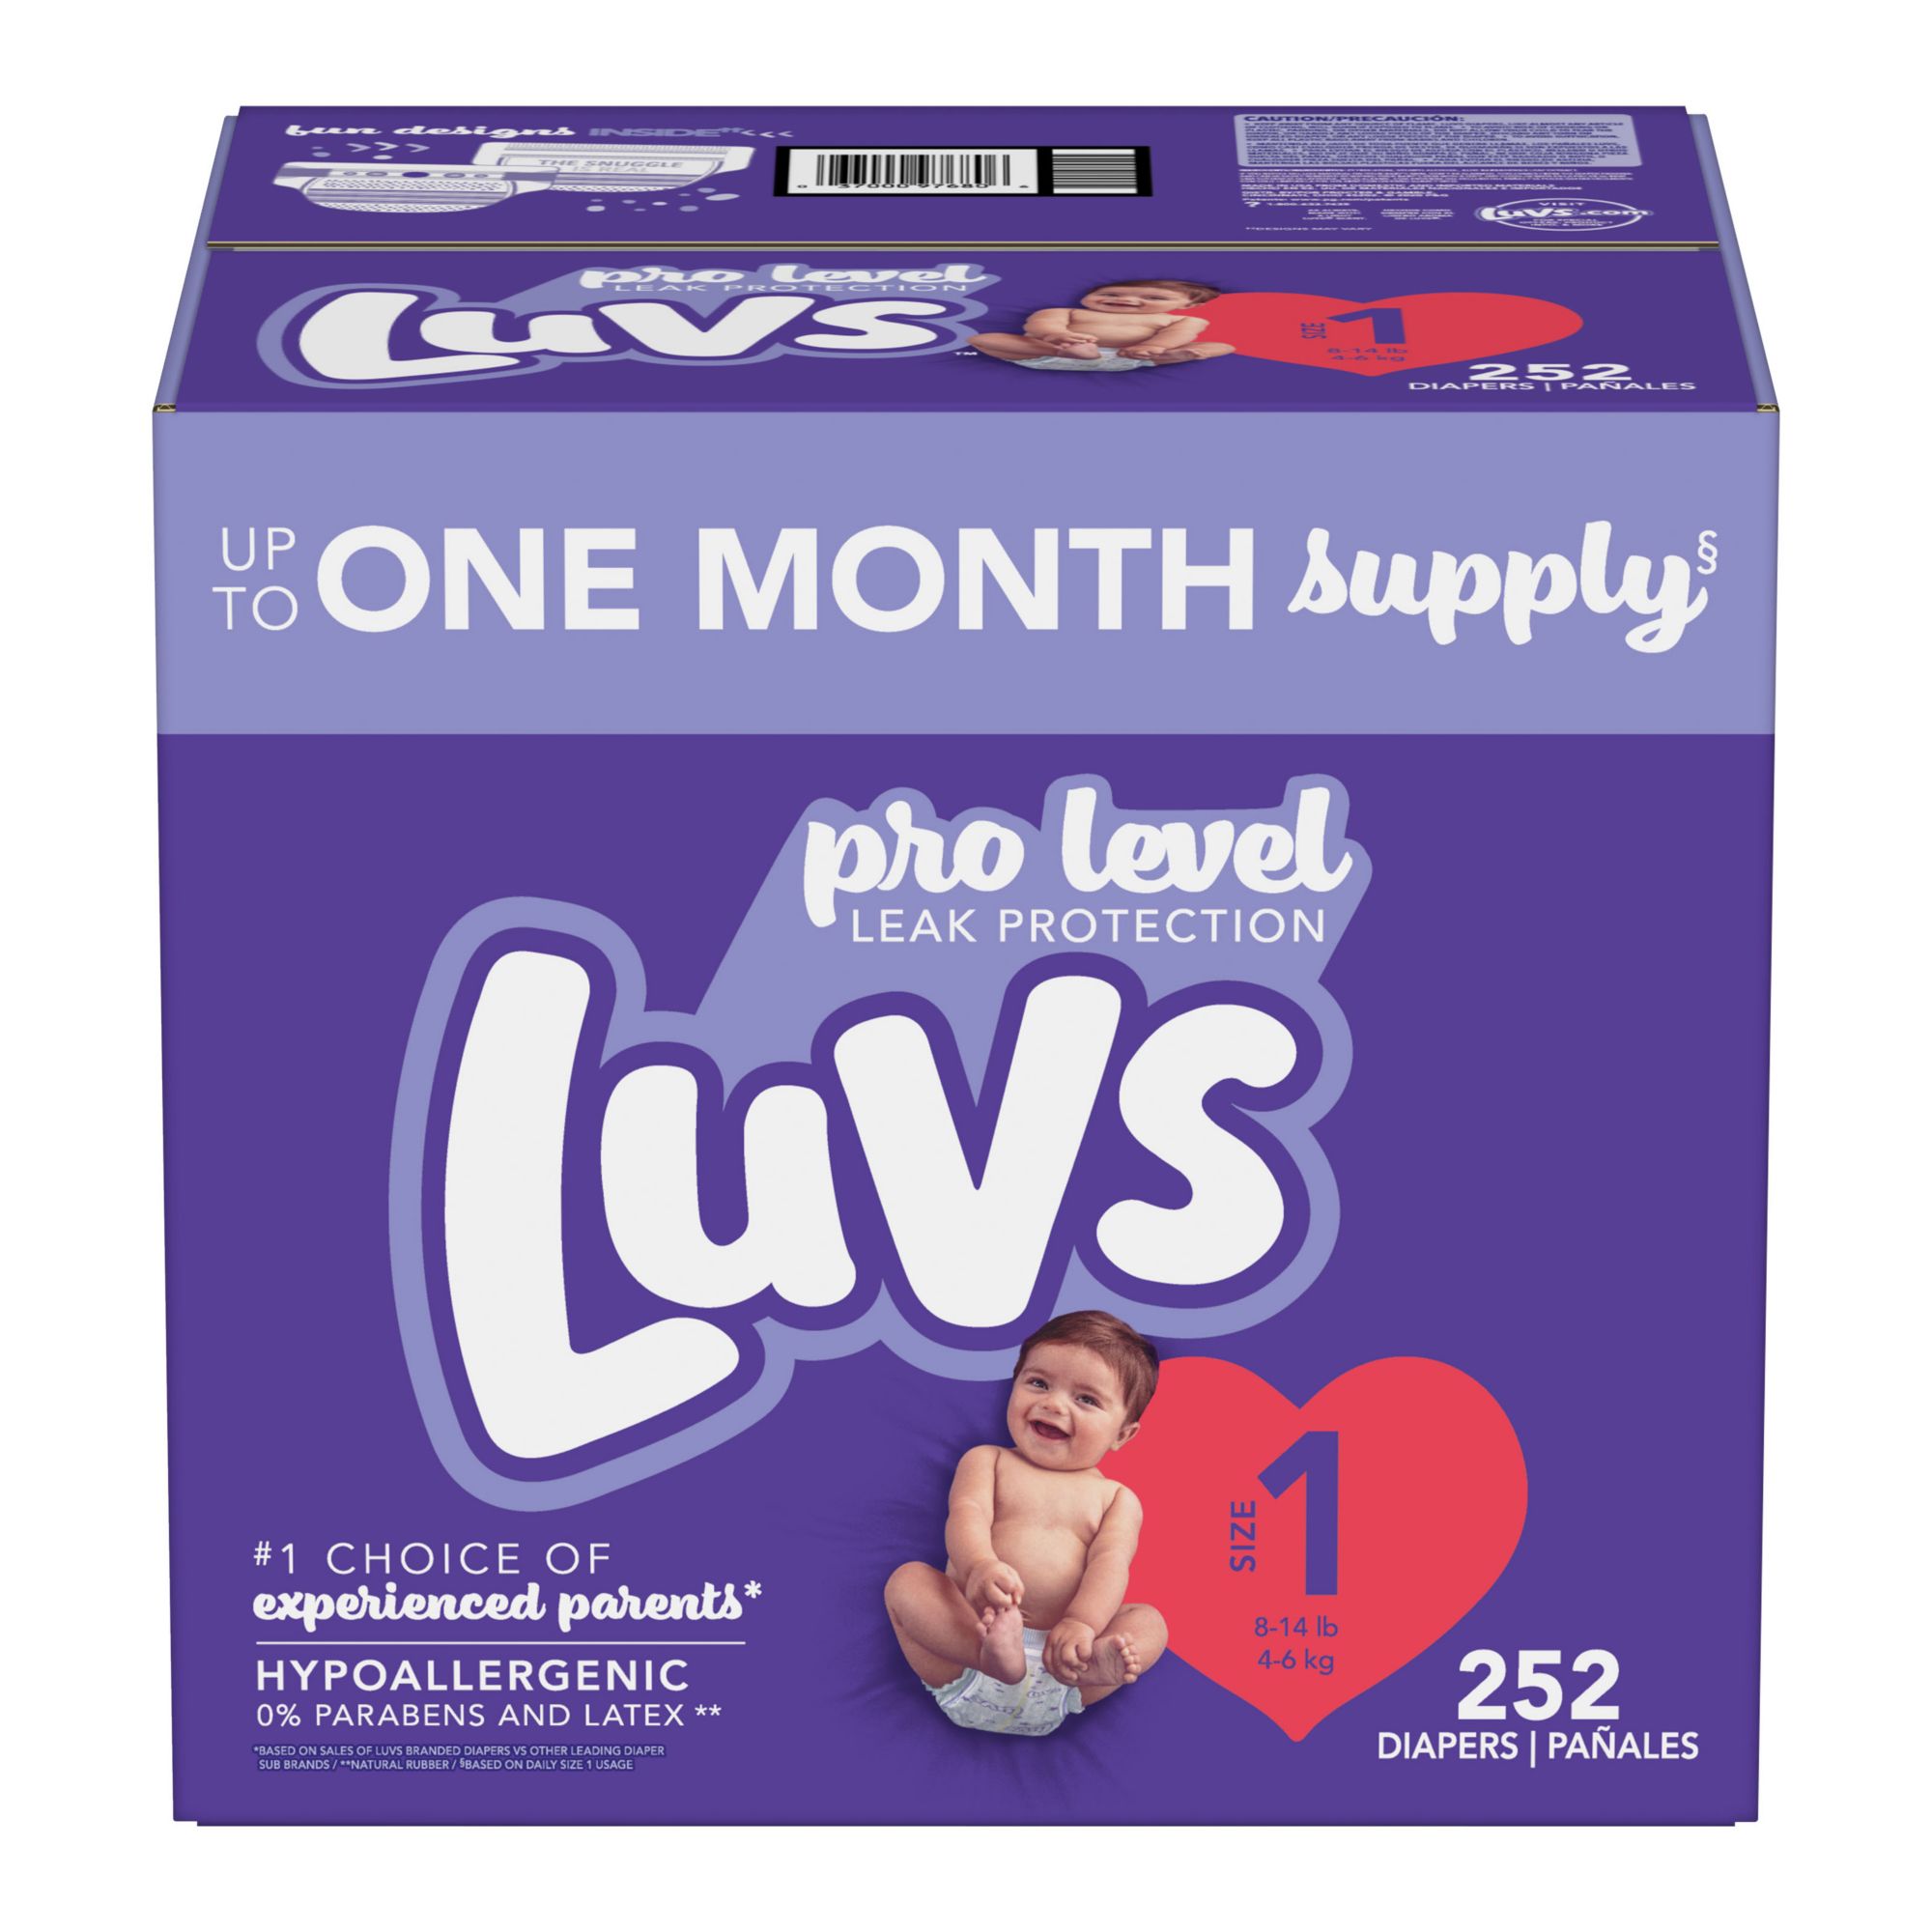 Luvs Ultra Leakguard Diapers 172 Count Size 5